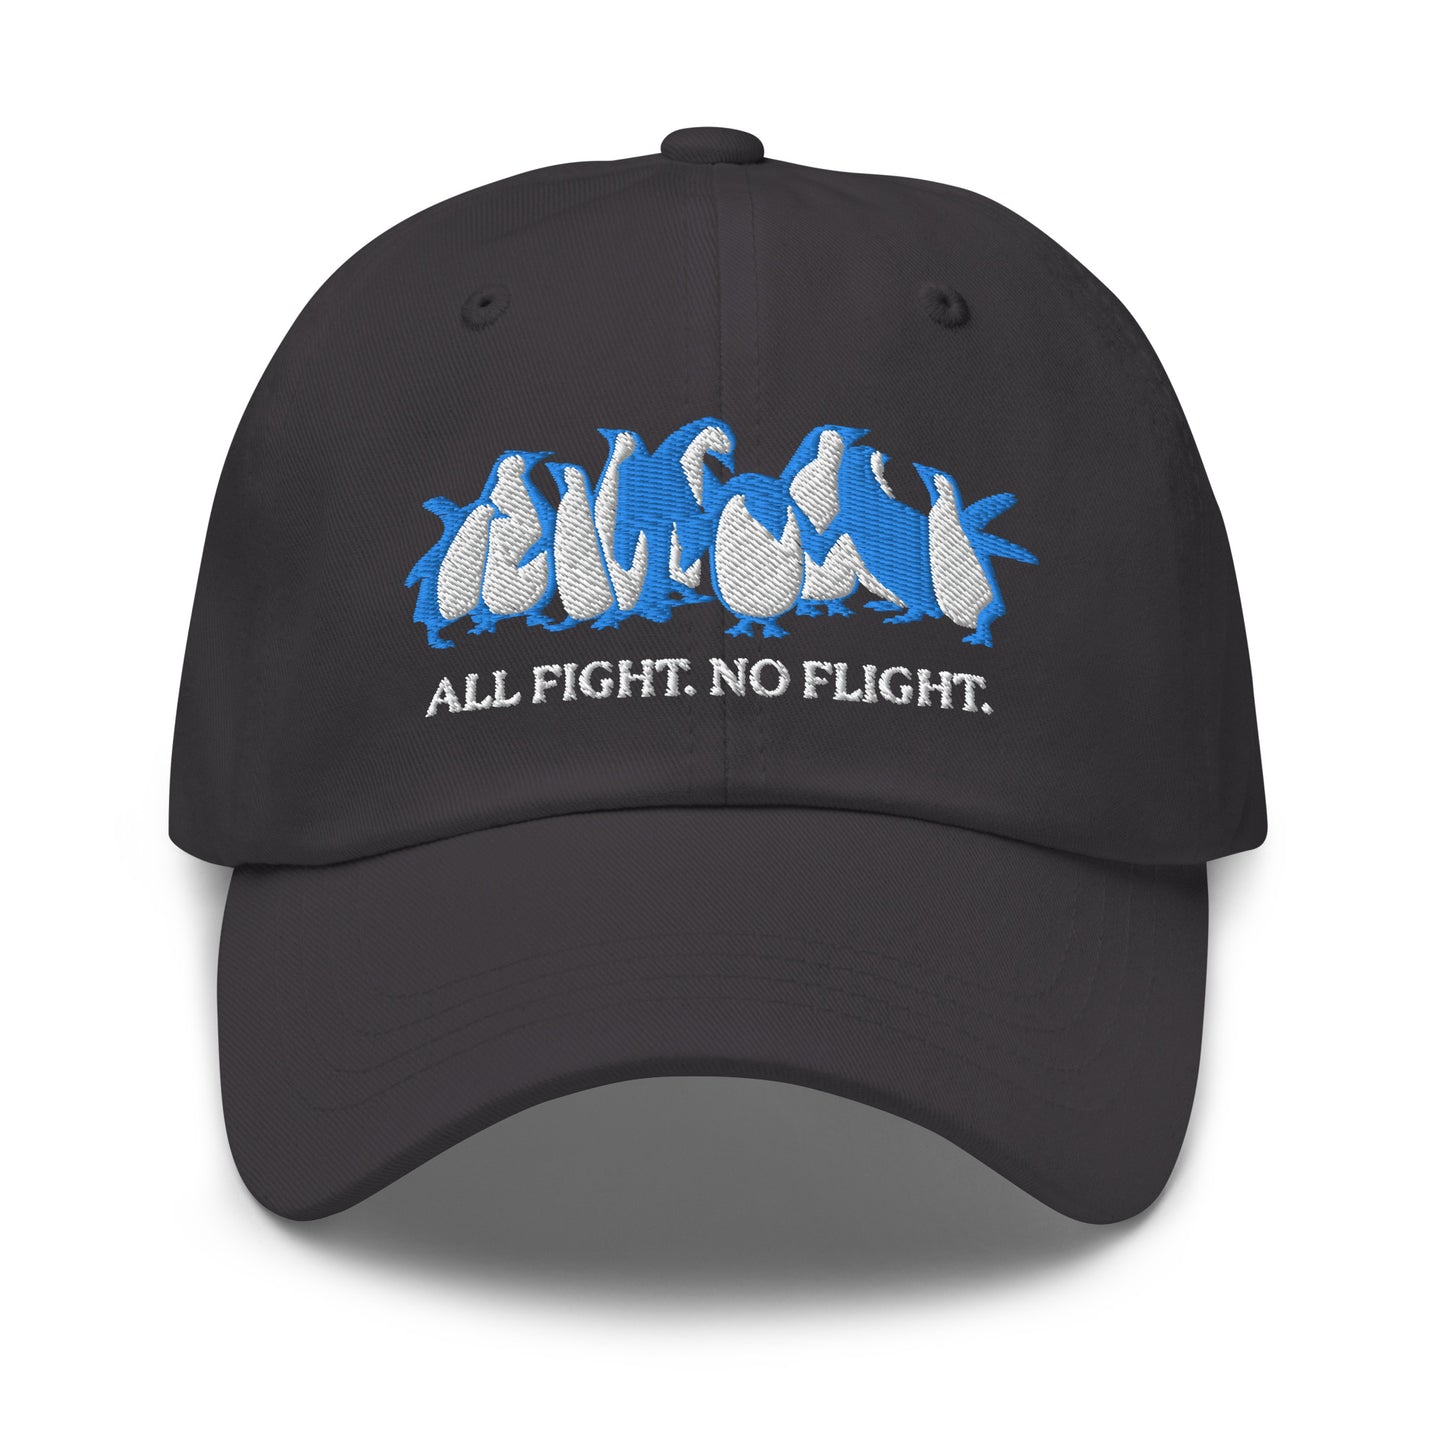 All Fight. No Fight. hat